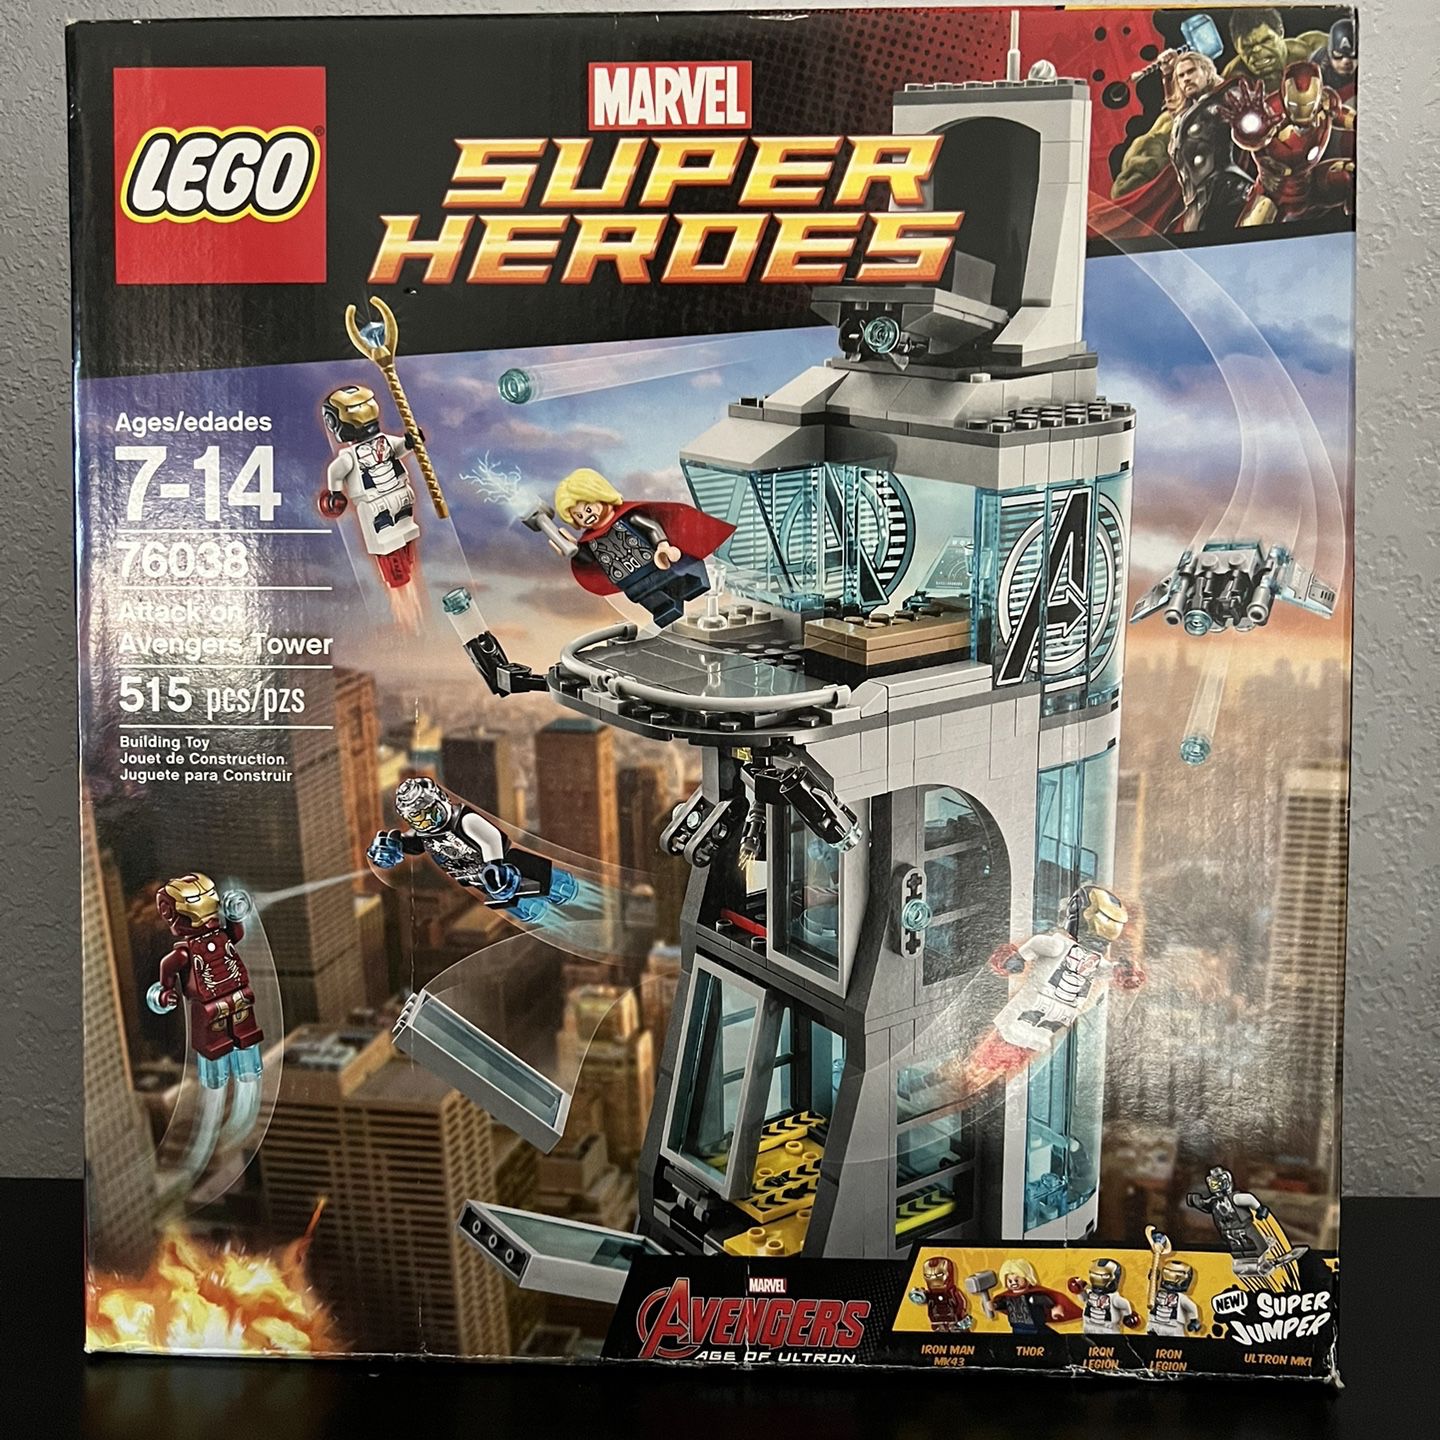  LEGO Super Heroes Attack on Avengers Tower 76038 : Toys & Games